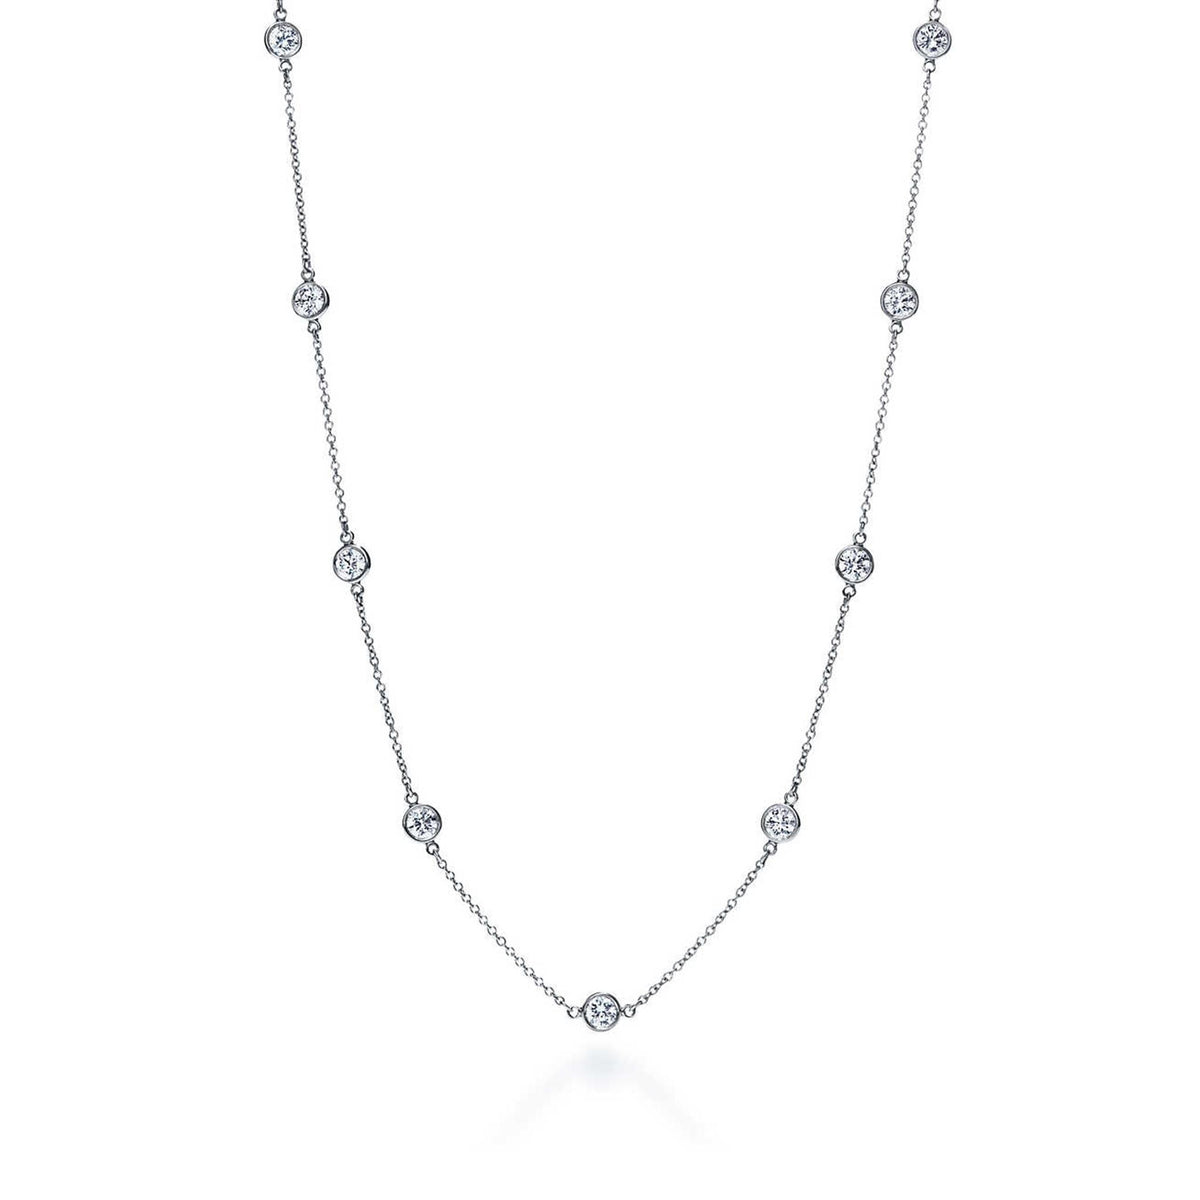 Milestone 14Kt White Gold Diamonds-By-The-Yard Necklace With 2.00cttw Lab-Grown Diamonds